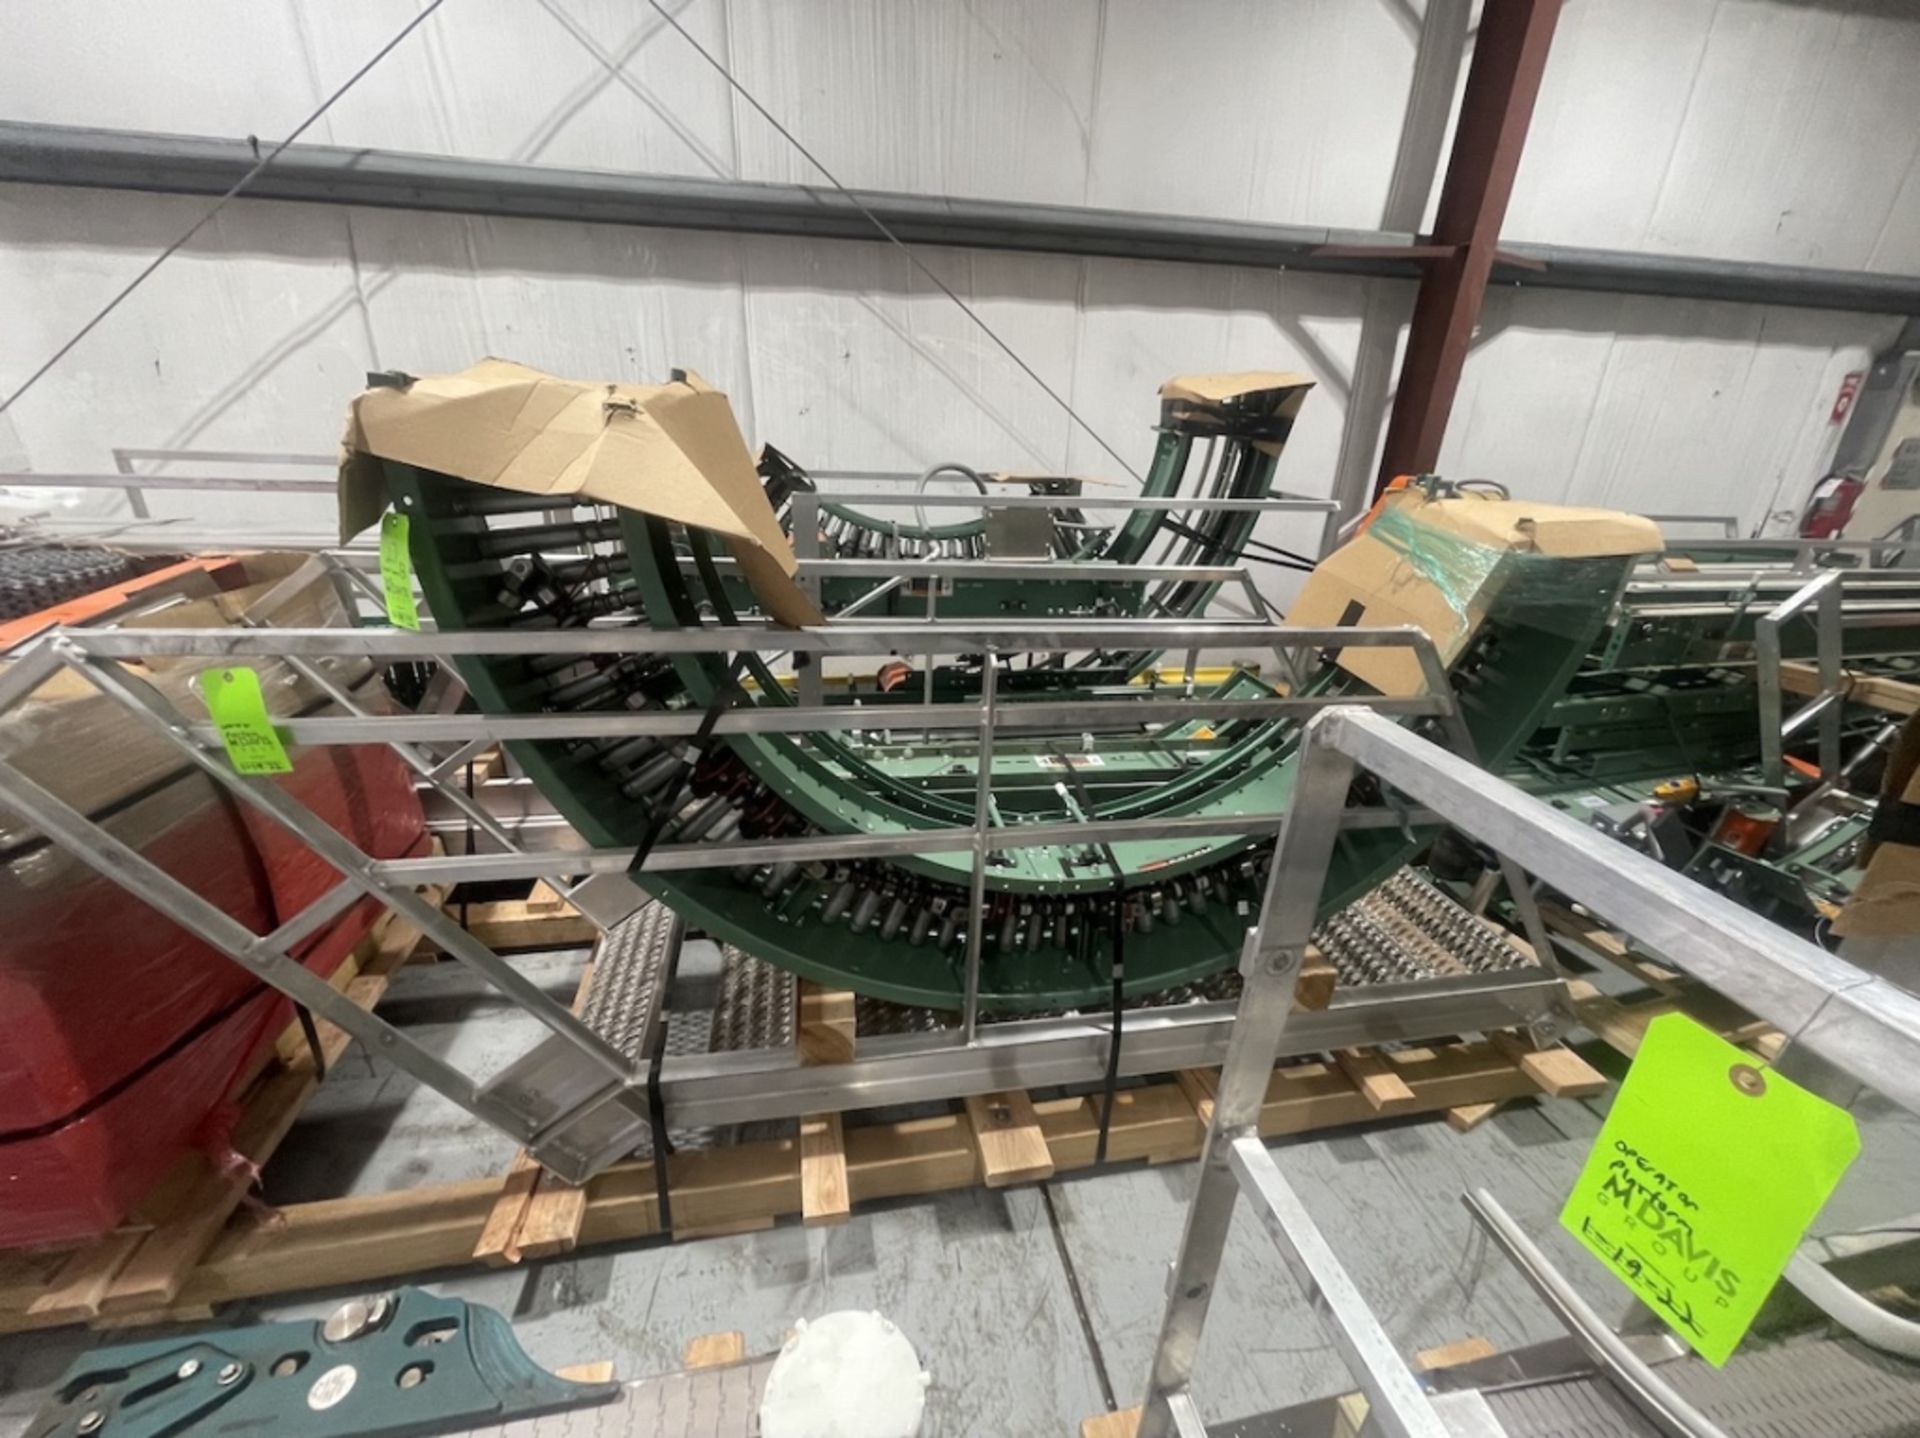 CASE CONVEYOR SYSTEMS ON PRODUCTION LINE (2019 MFG)(Loading, Handling & Site Management Fee: $1250. - Image 6 of 11